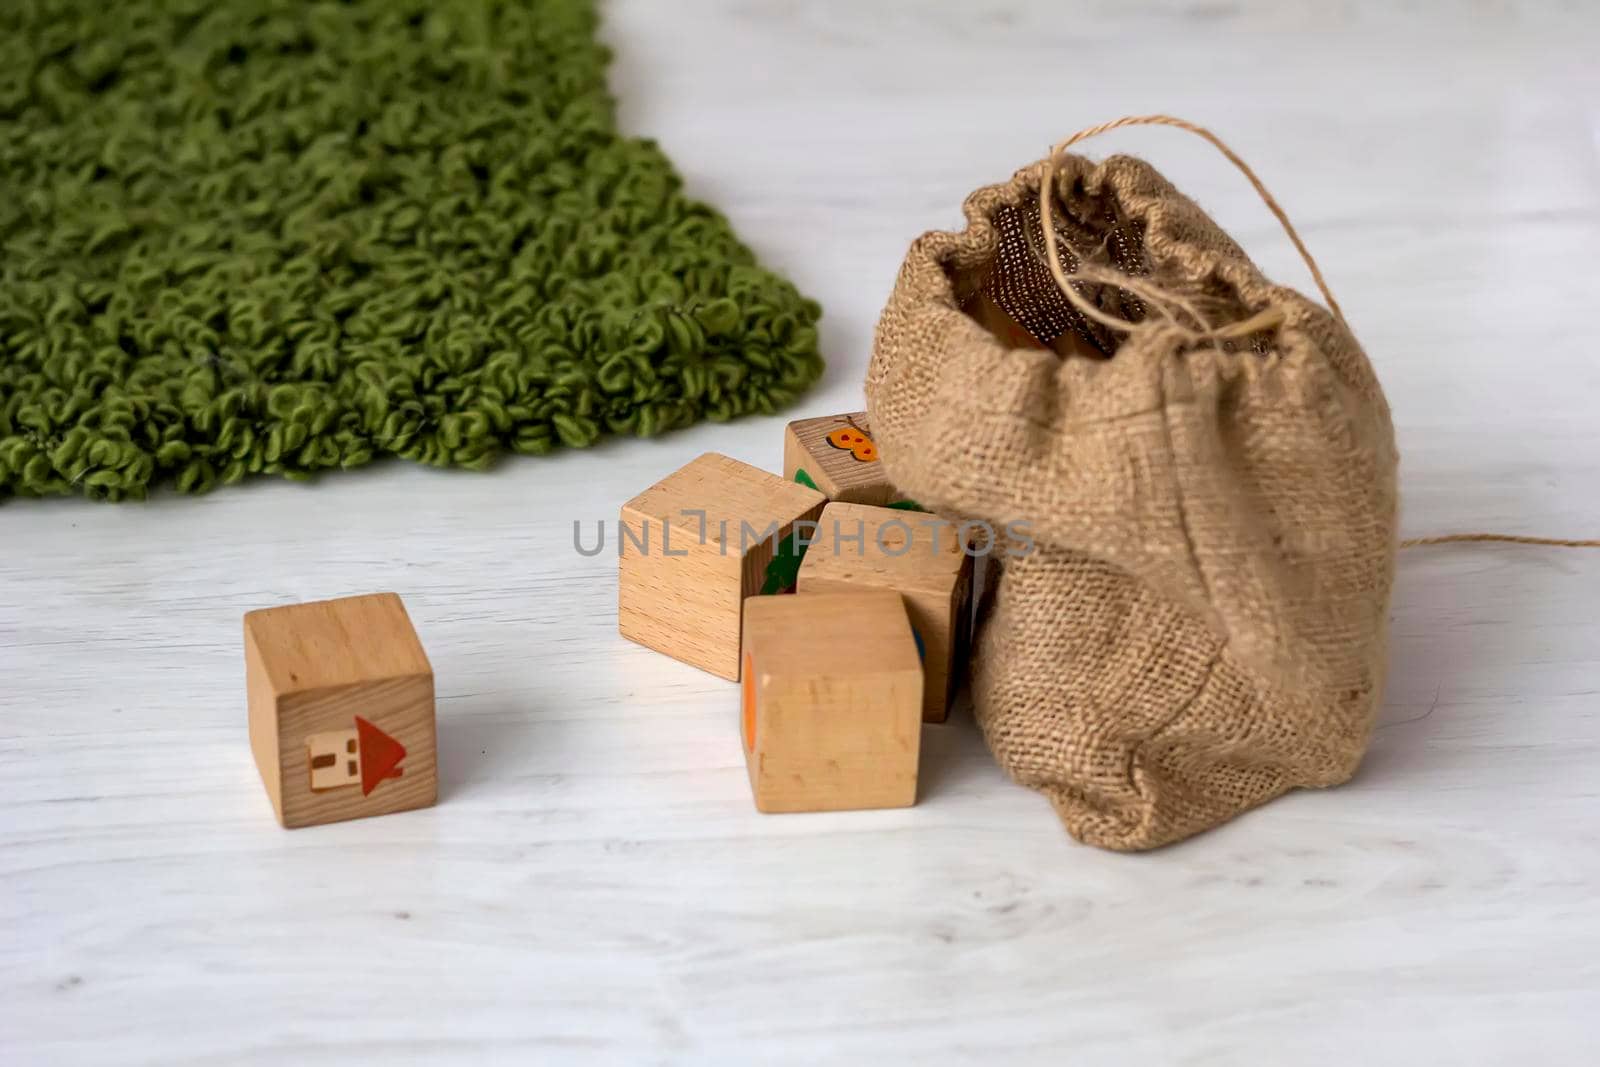 wood cube building blocks and bag on the floor in a home